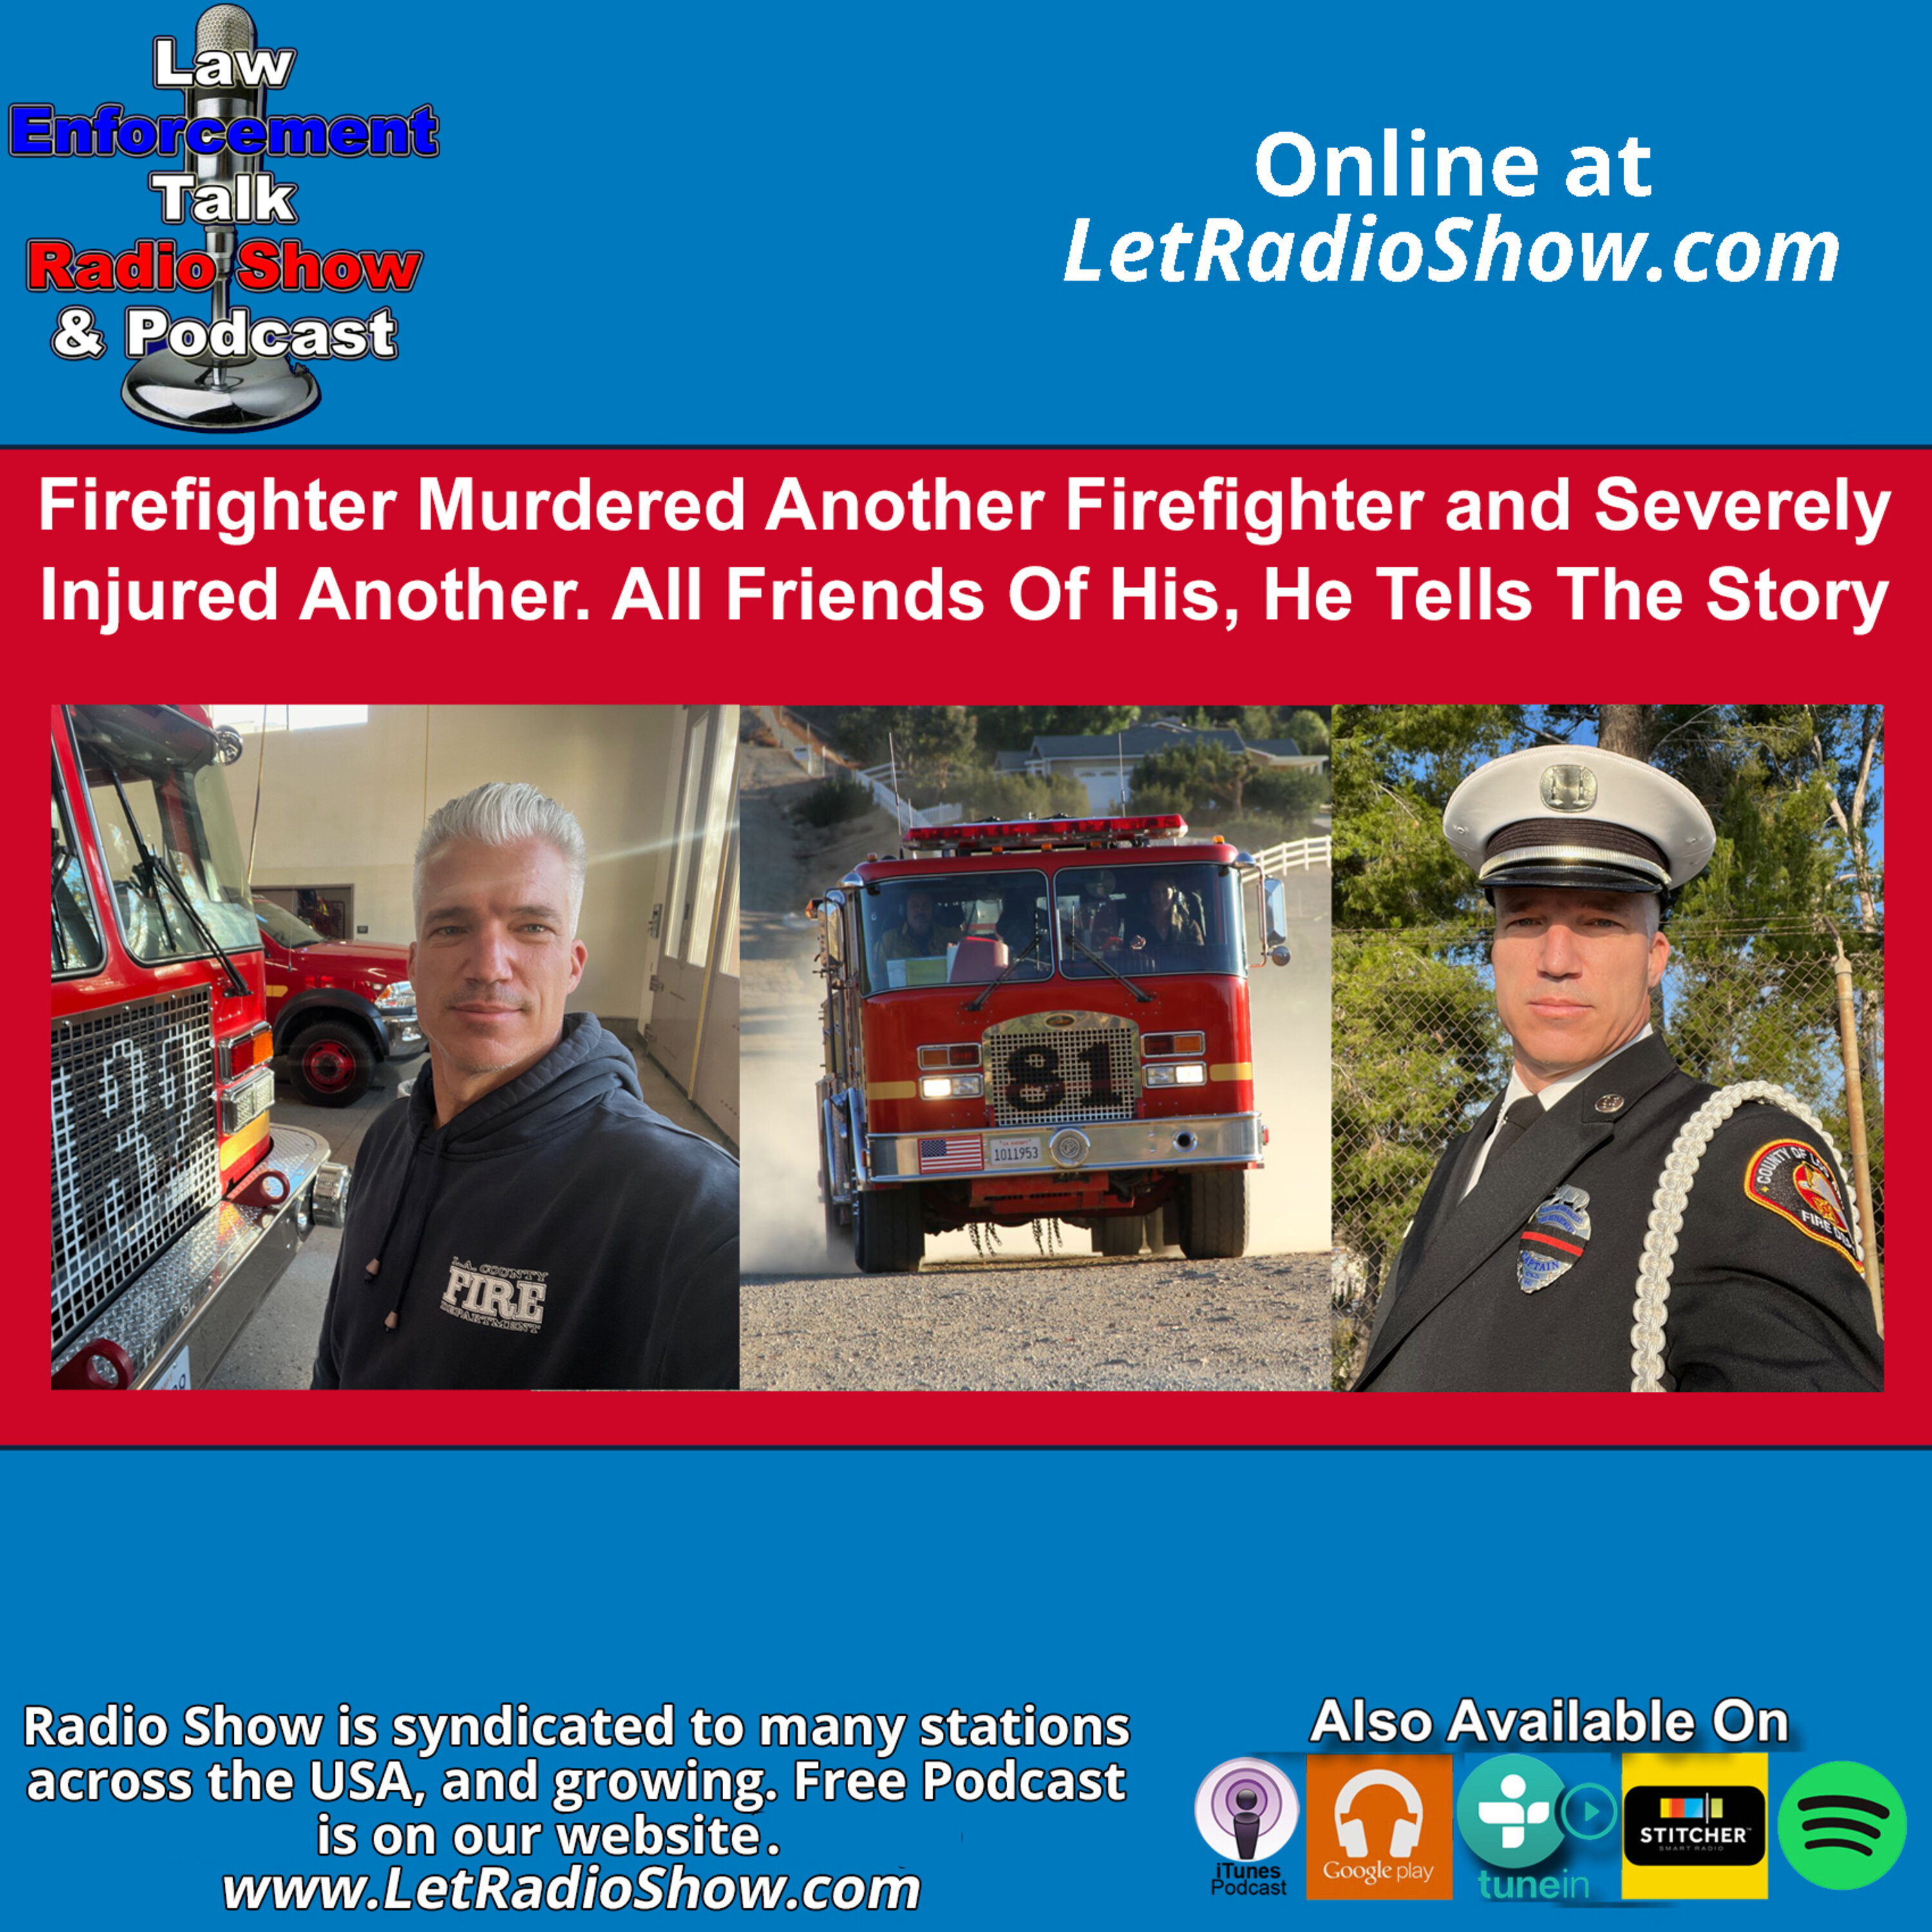 Firefighter Murdered Another Firefighter and Severely Injured Another. All Friends Of His, He Tells The Story